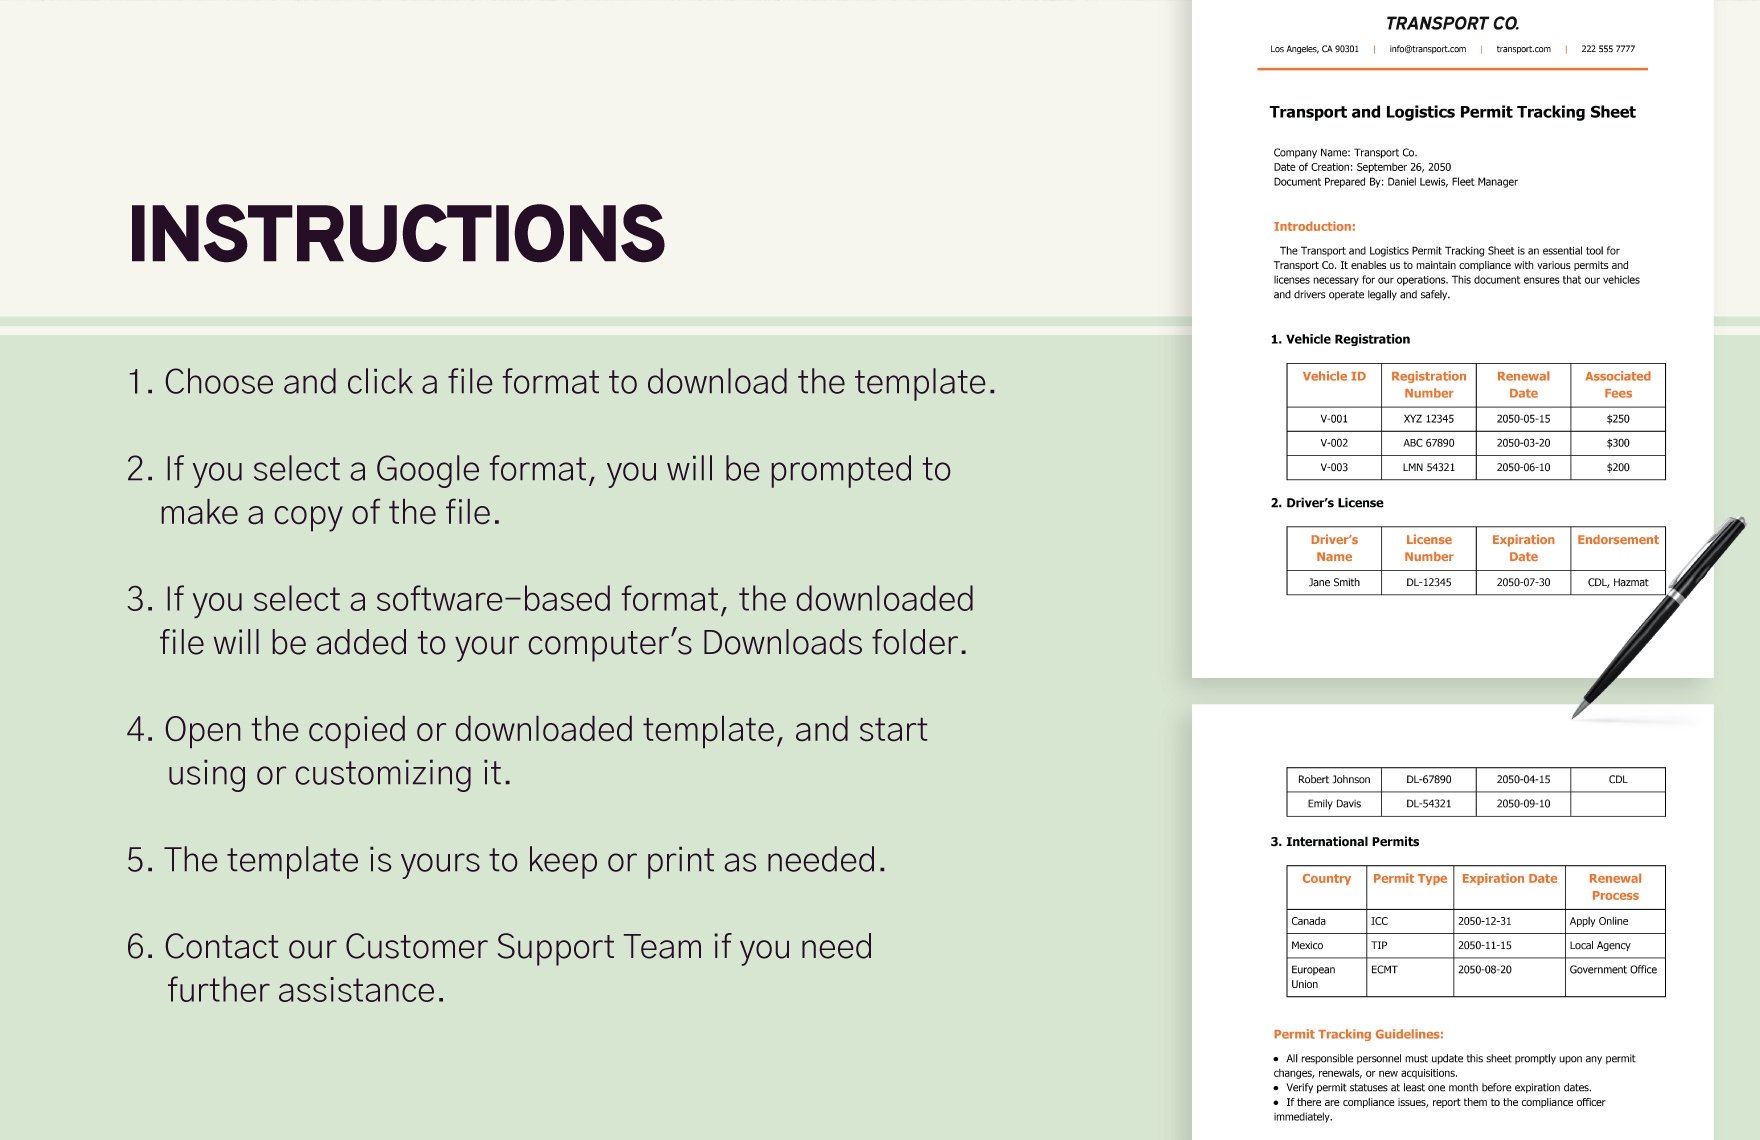 Transport and Logistics Permit Tracking Sheet Template